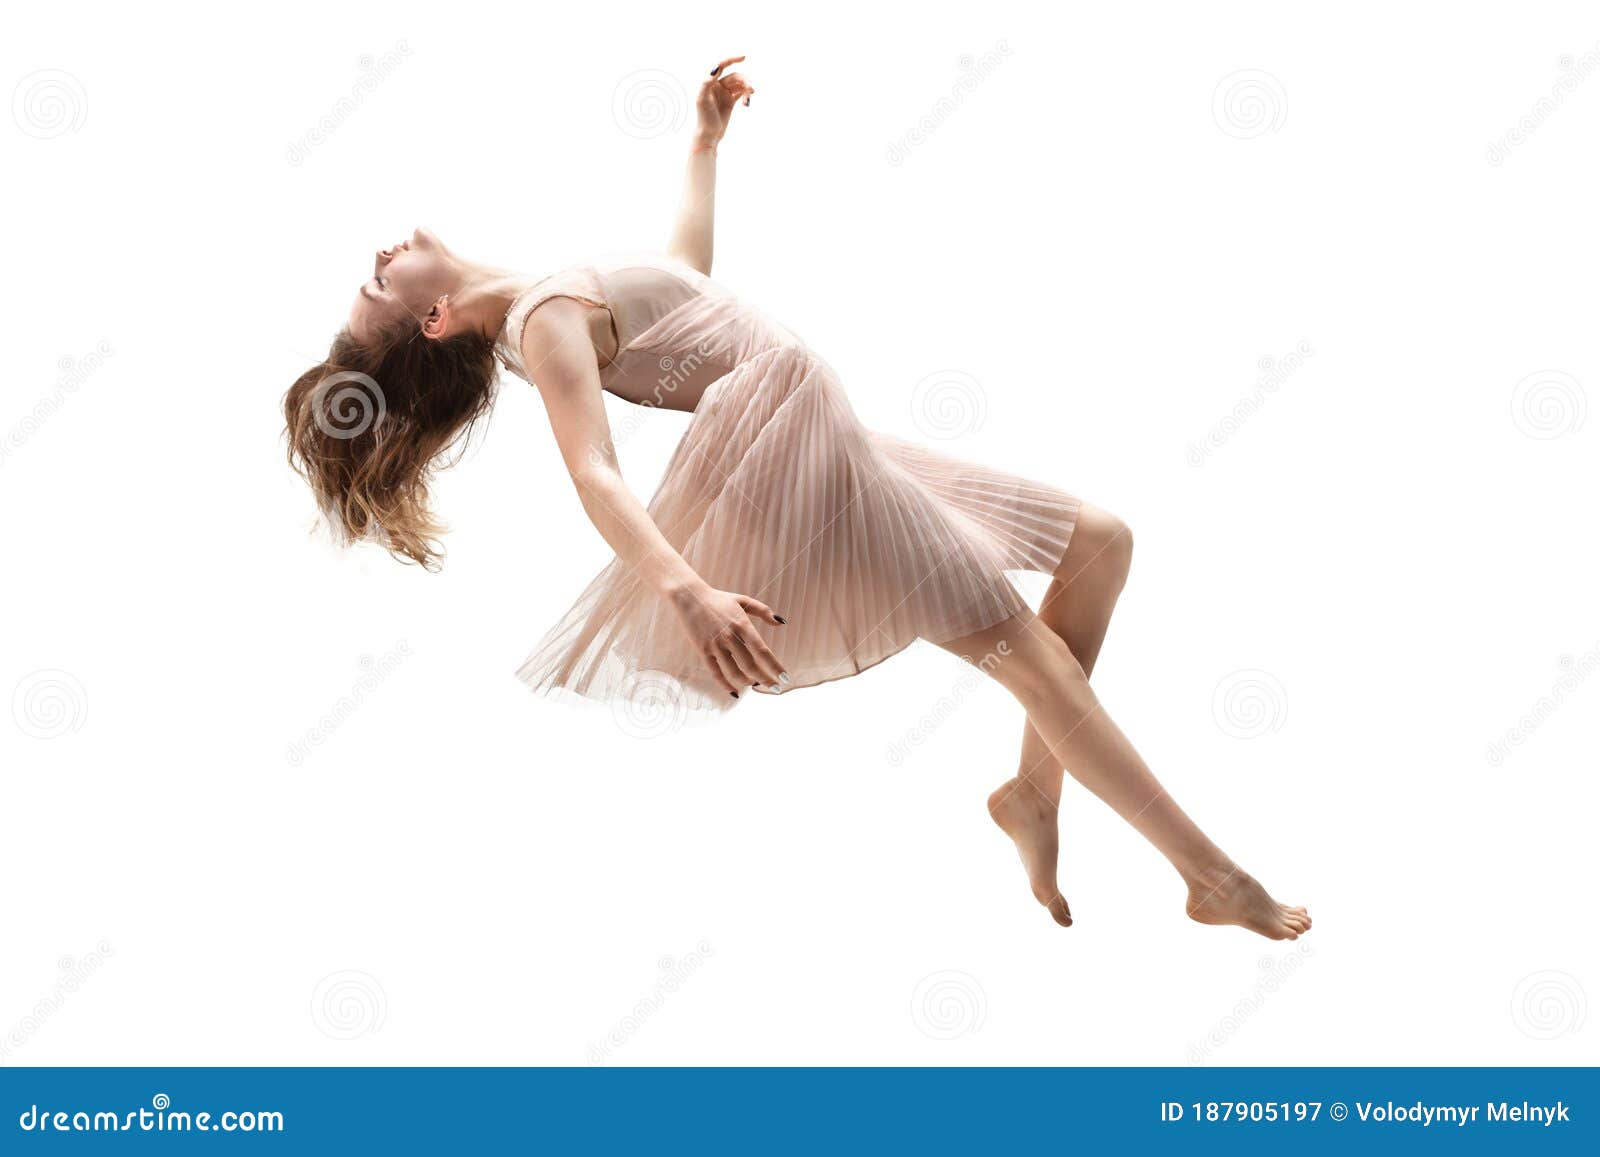 mid-air beauty. full length studio shot of attractive young woman hovering in air and keeping eyes closed